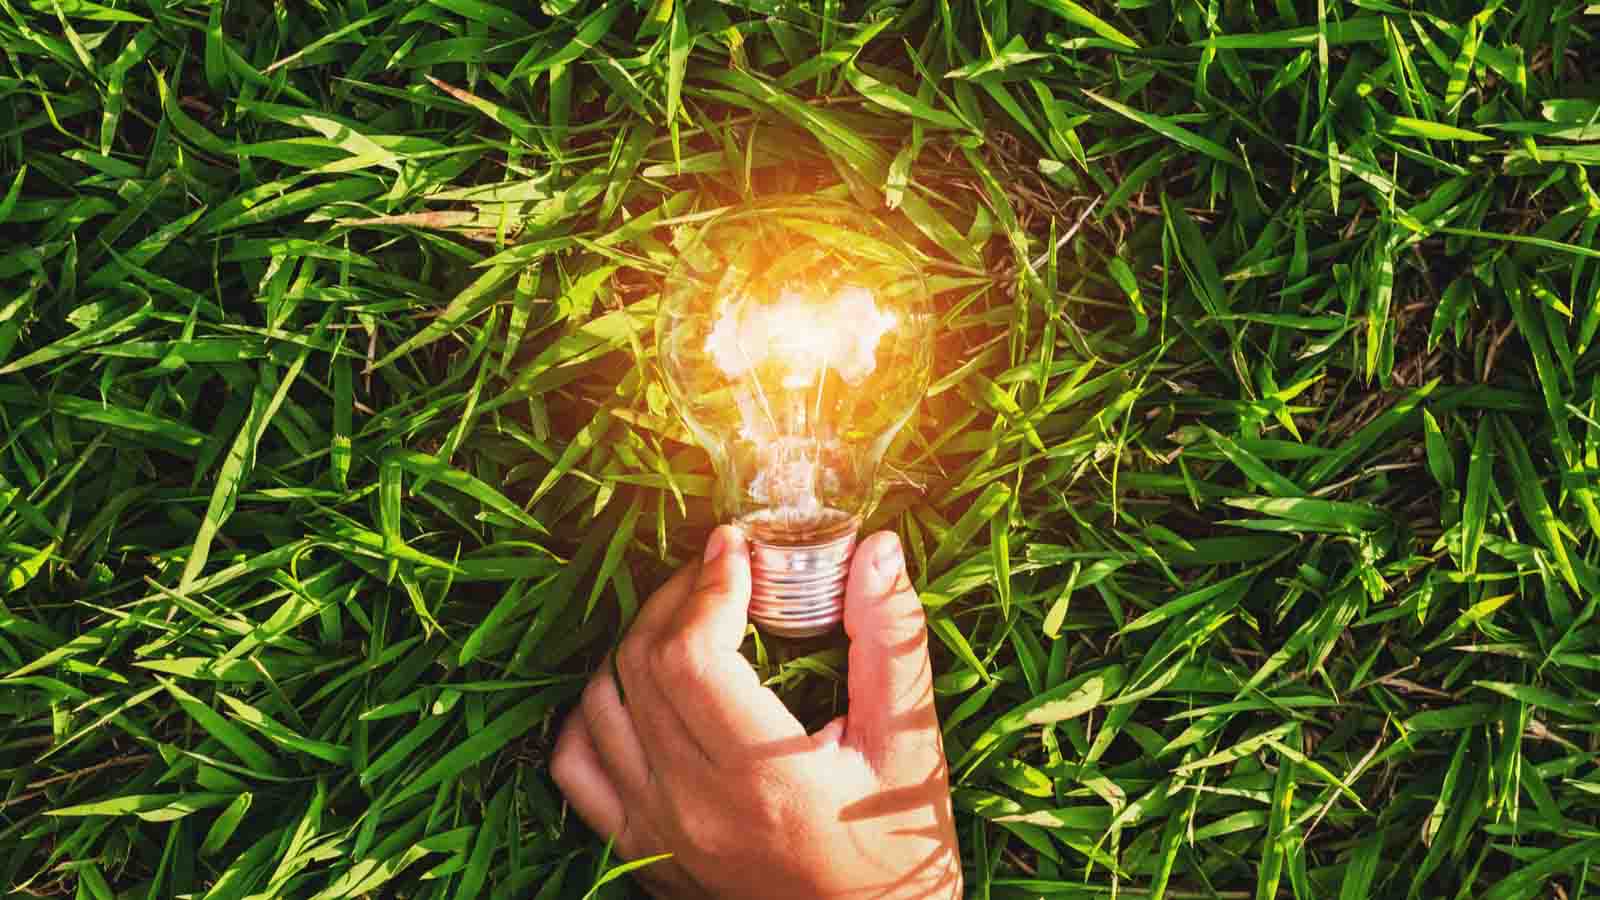 Eco-friendly stocks - Investing in a Greener Future: 3 Stocks for the Eco-Conscious Investor